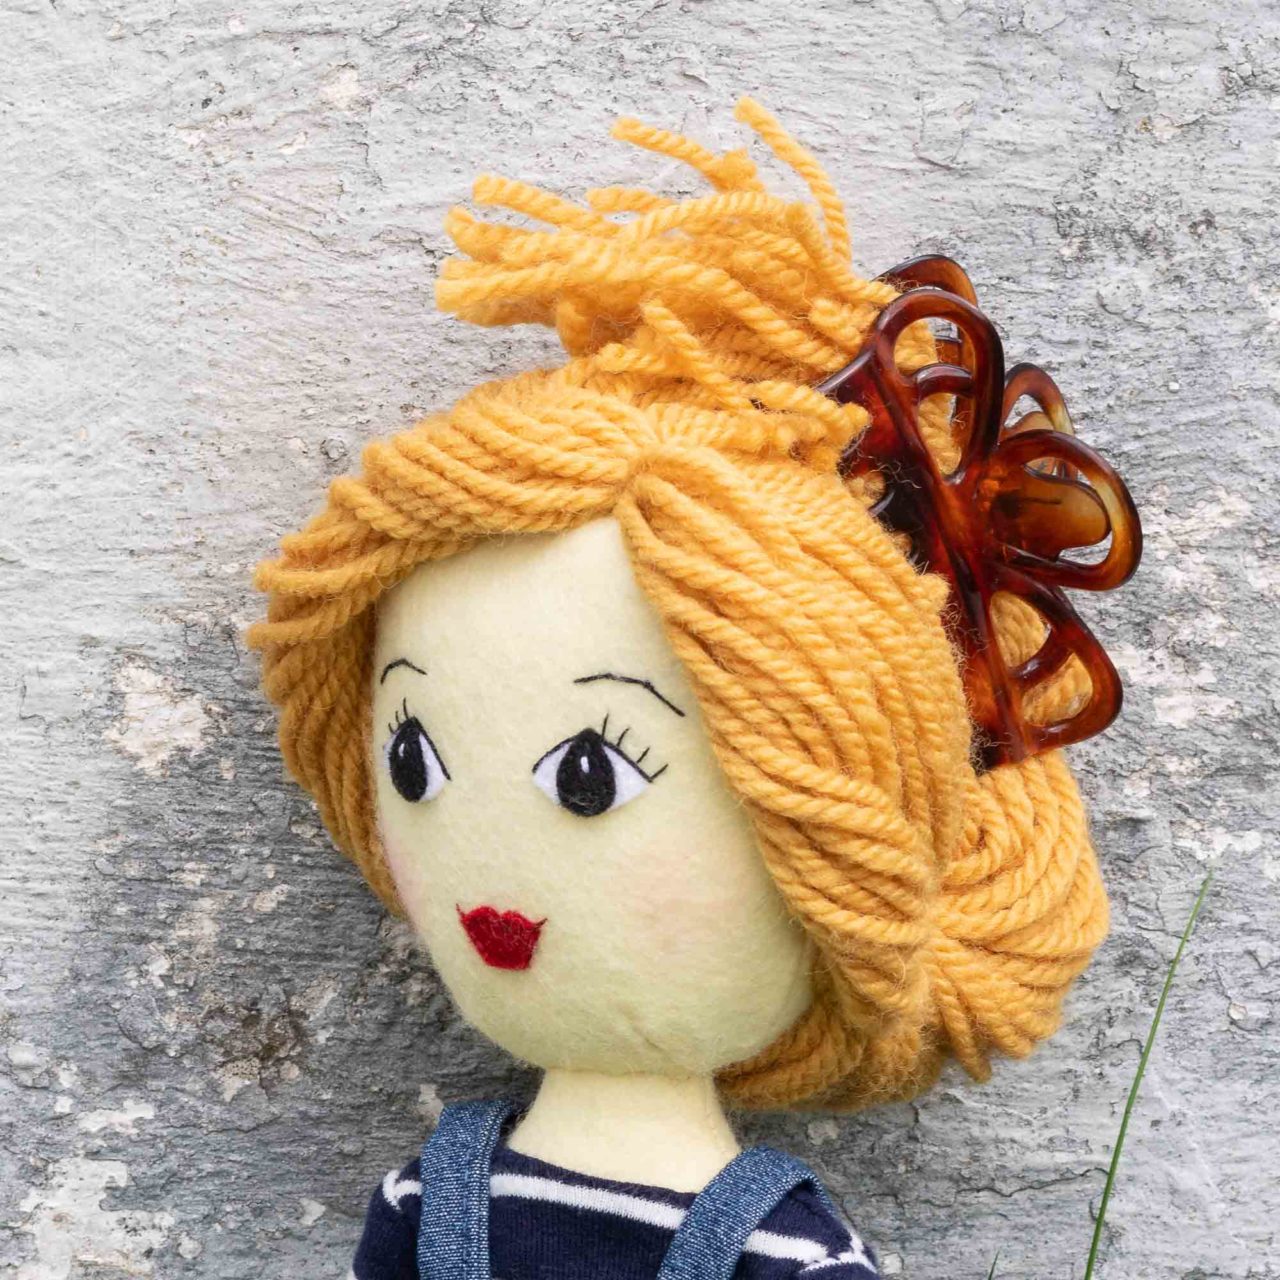 How To Make A Tilly Doll With Yarn Hair Tilly And Puffin